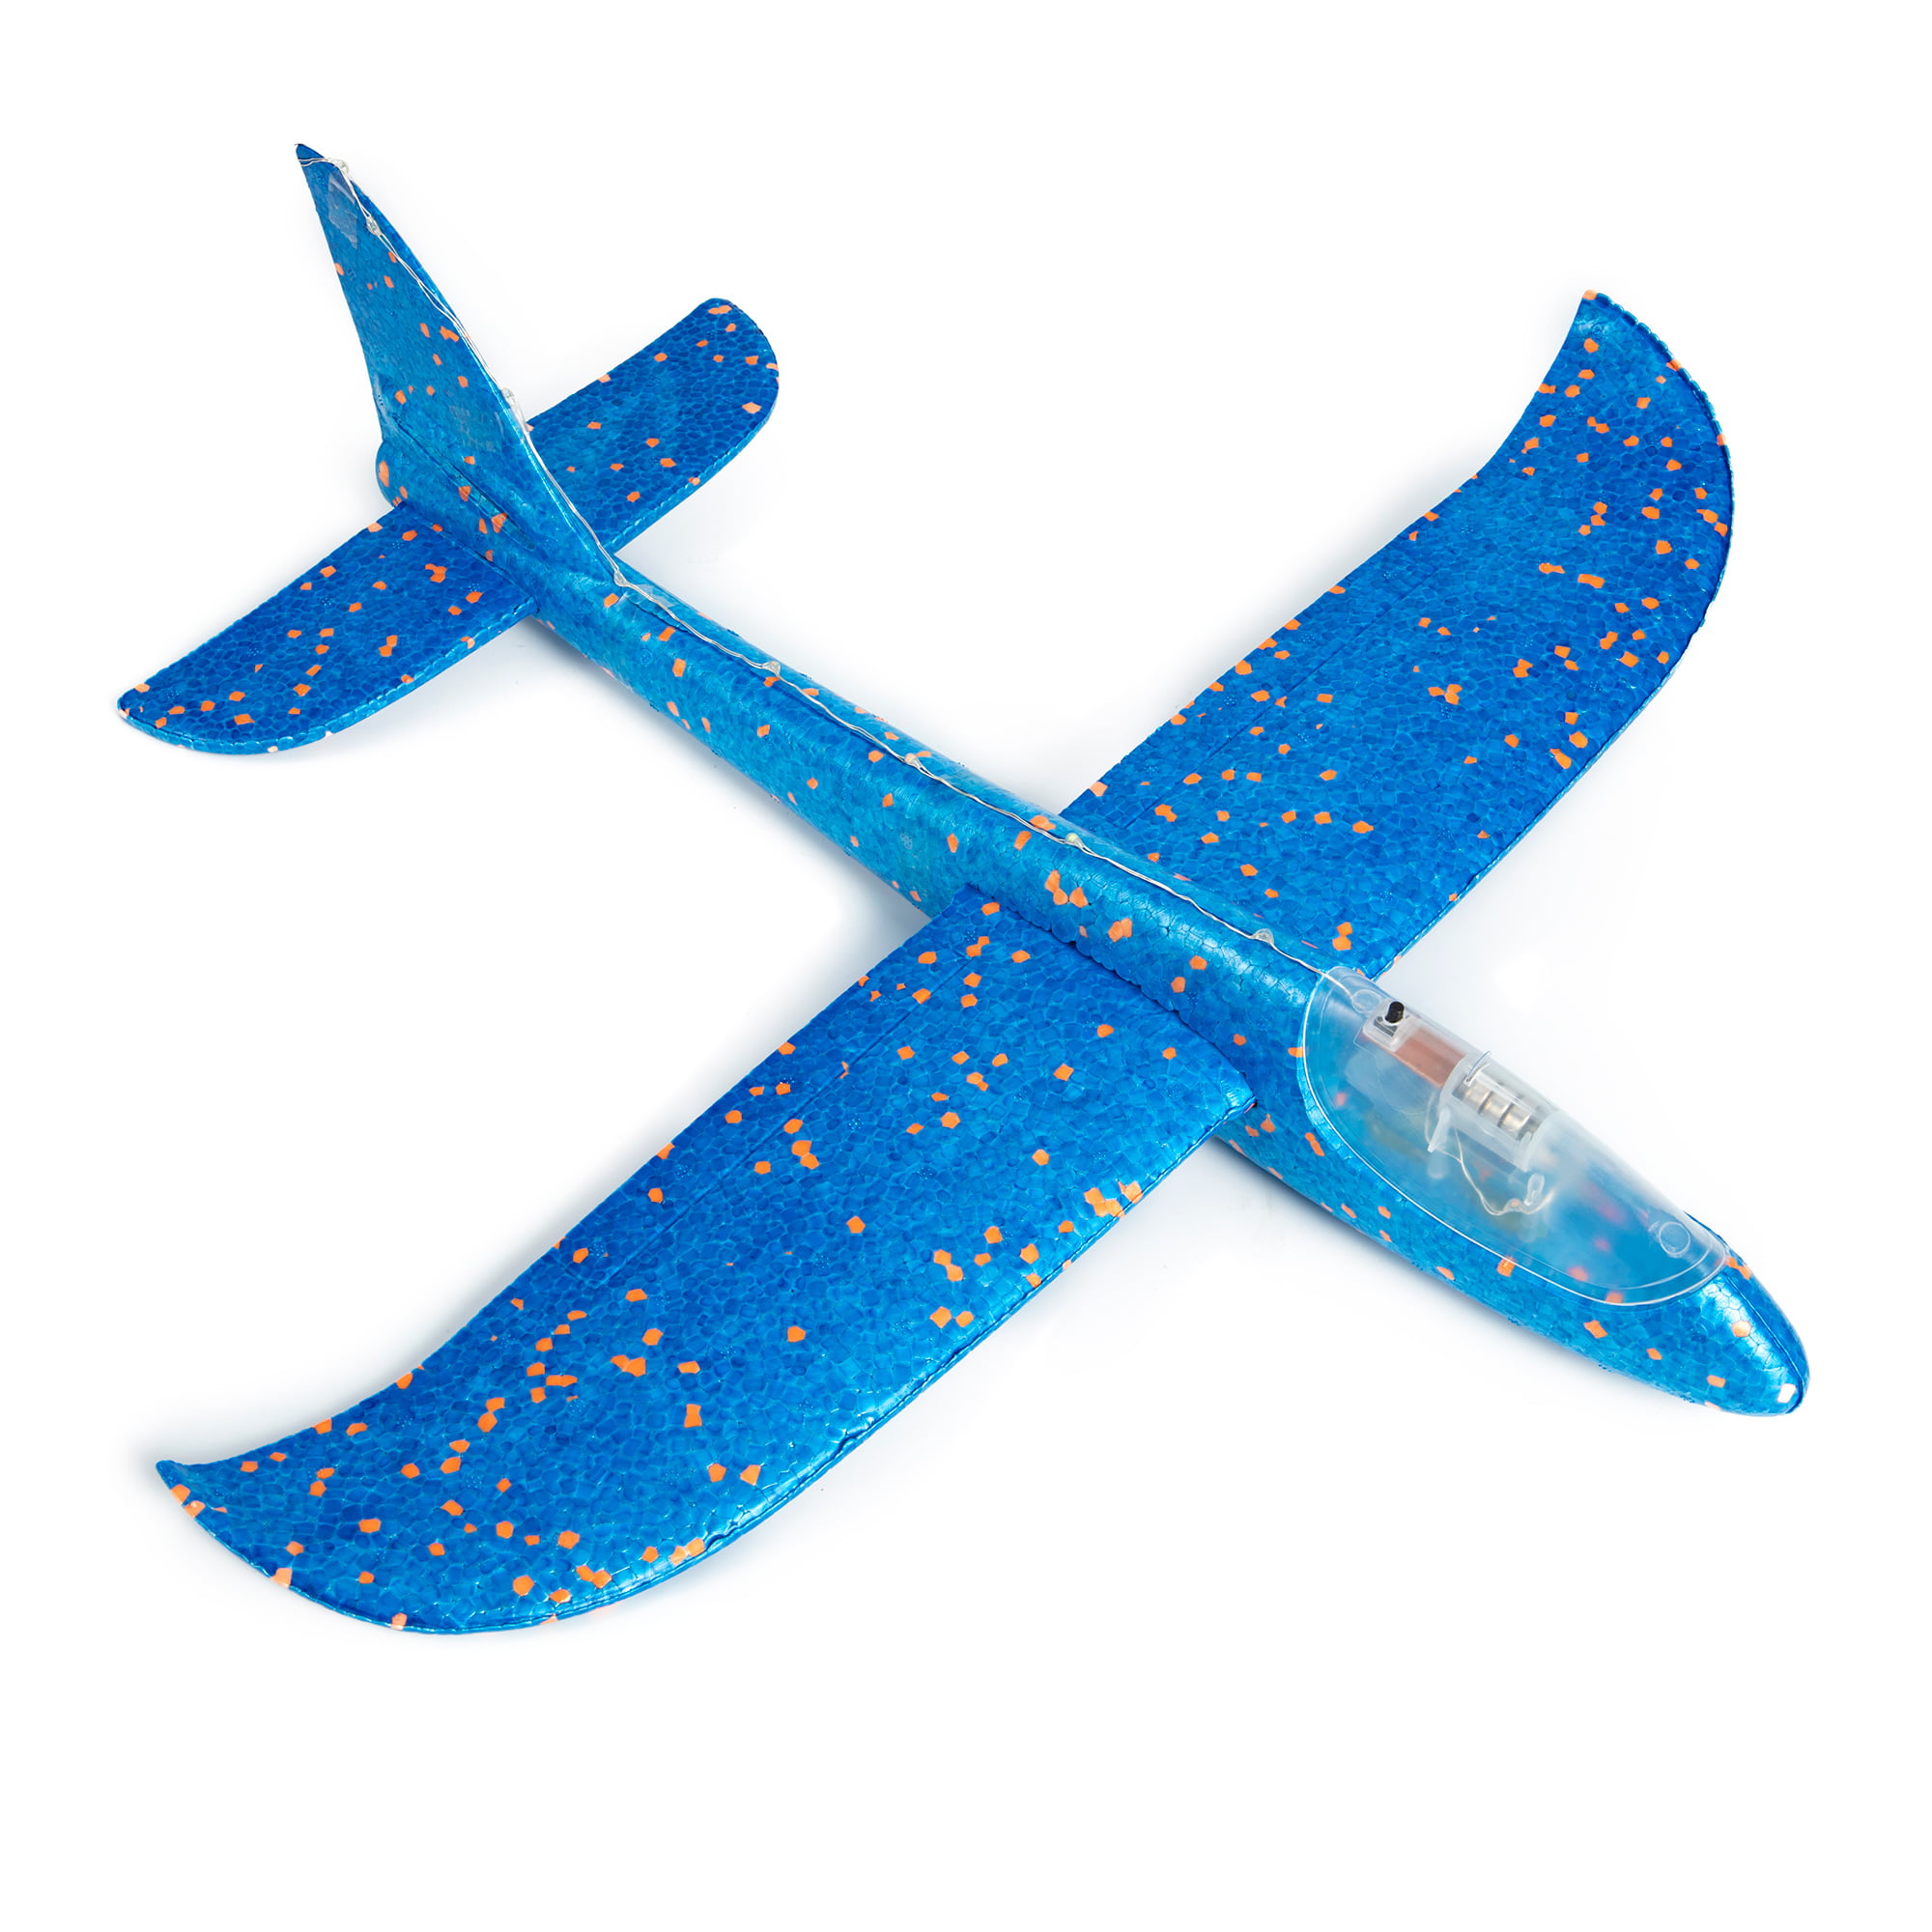 Styrofoam Plane Glider Outdoor Toys Easy Throwing Air Planes STEM Summer Yard Beach Games Gifts for Age 4 5 6 7 8 9 10 Blue Airplane Toy Foam Airplanes for Kids